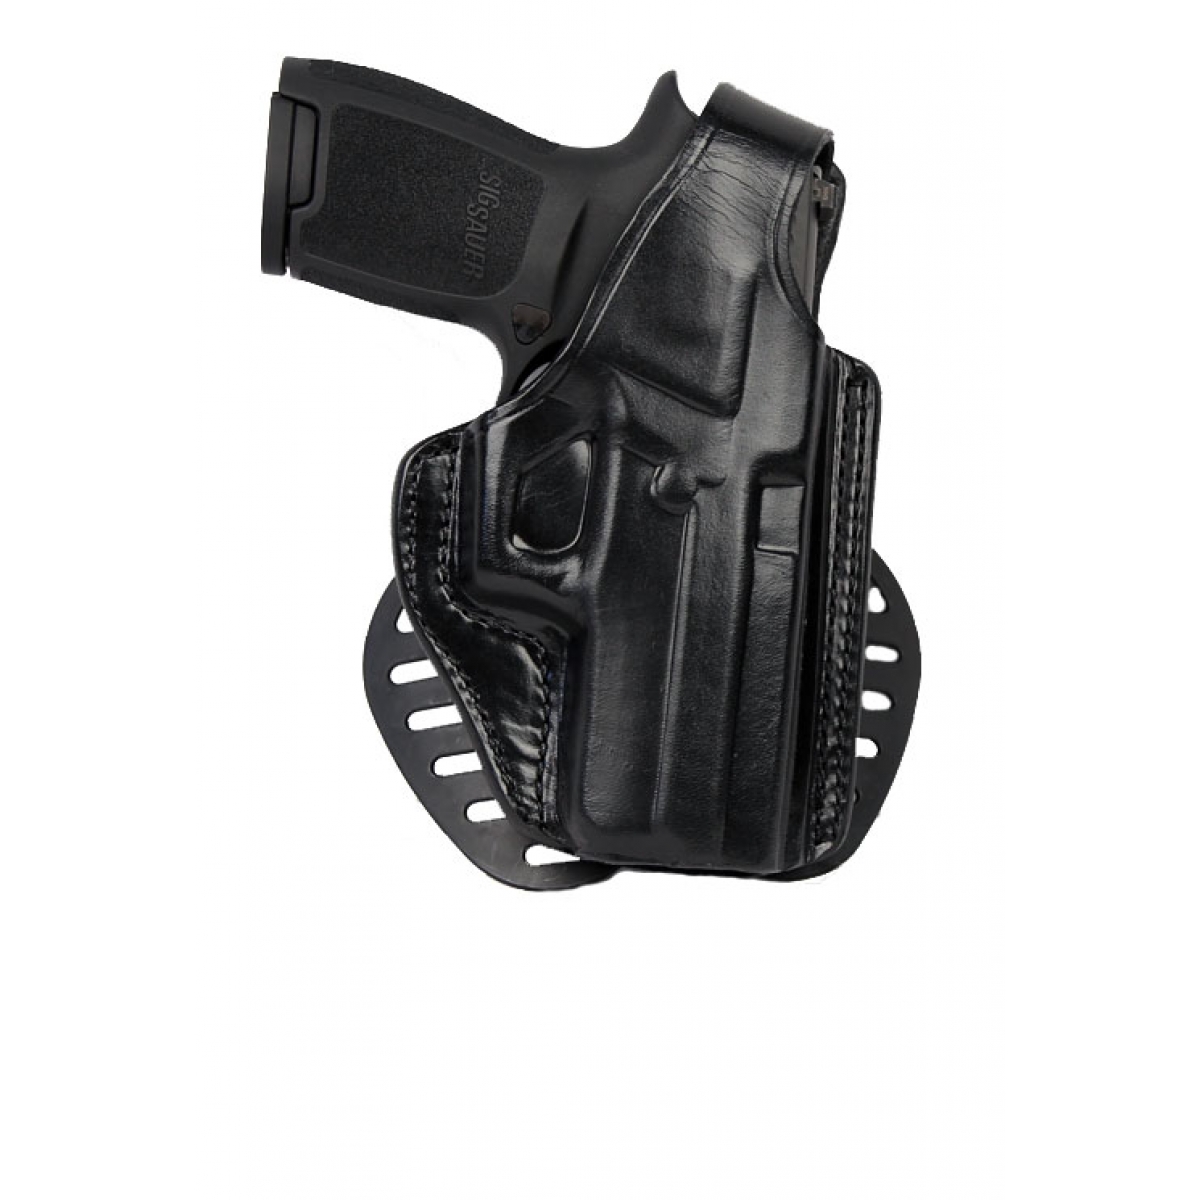 Gould & Goodrich Paddle Holster, Right Hand, BLACK - GLOCK 19,23,32